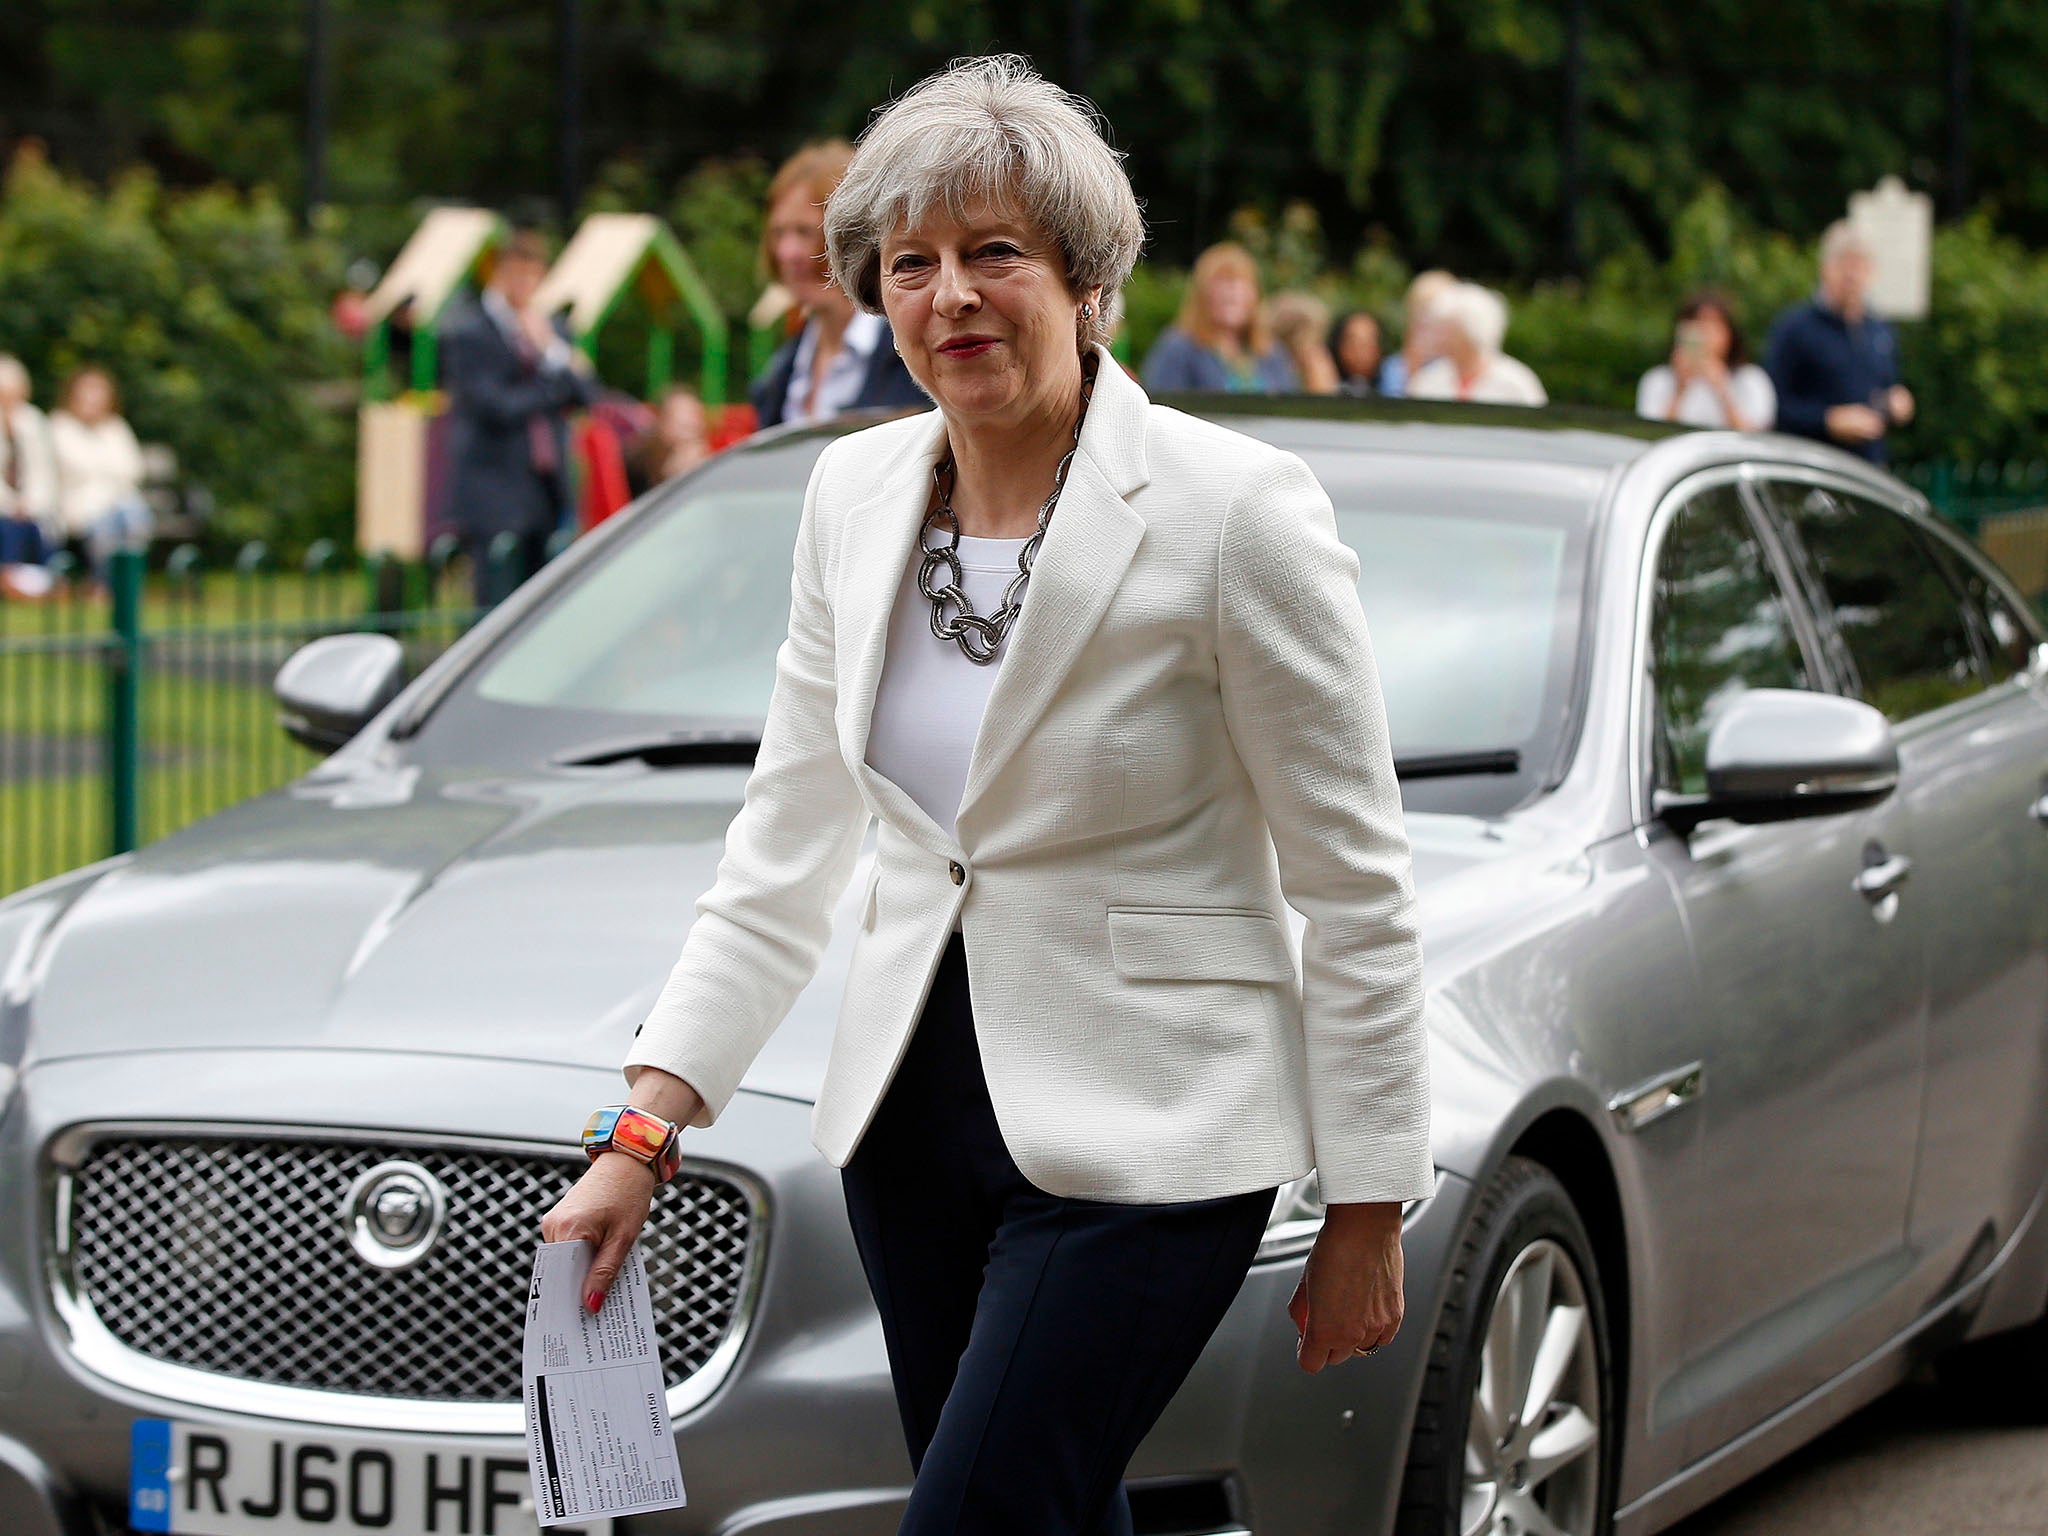 Theresa May arrives to cast her ballot at a polling station in Maidenhead, England